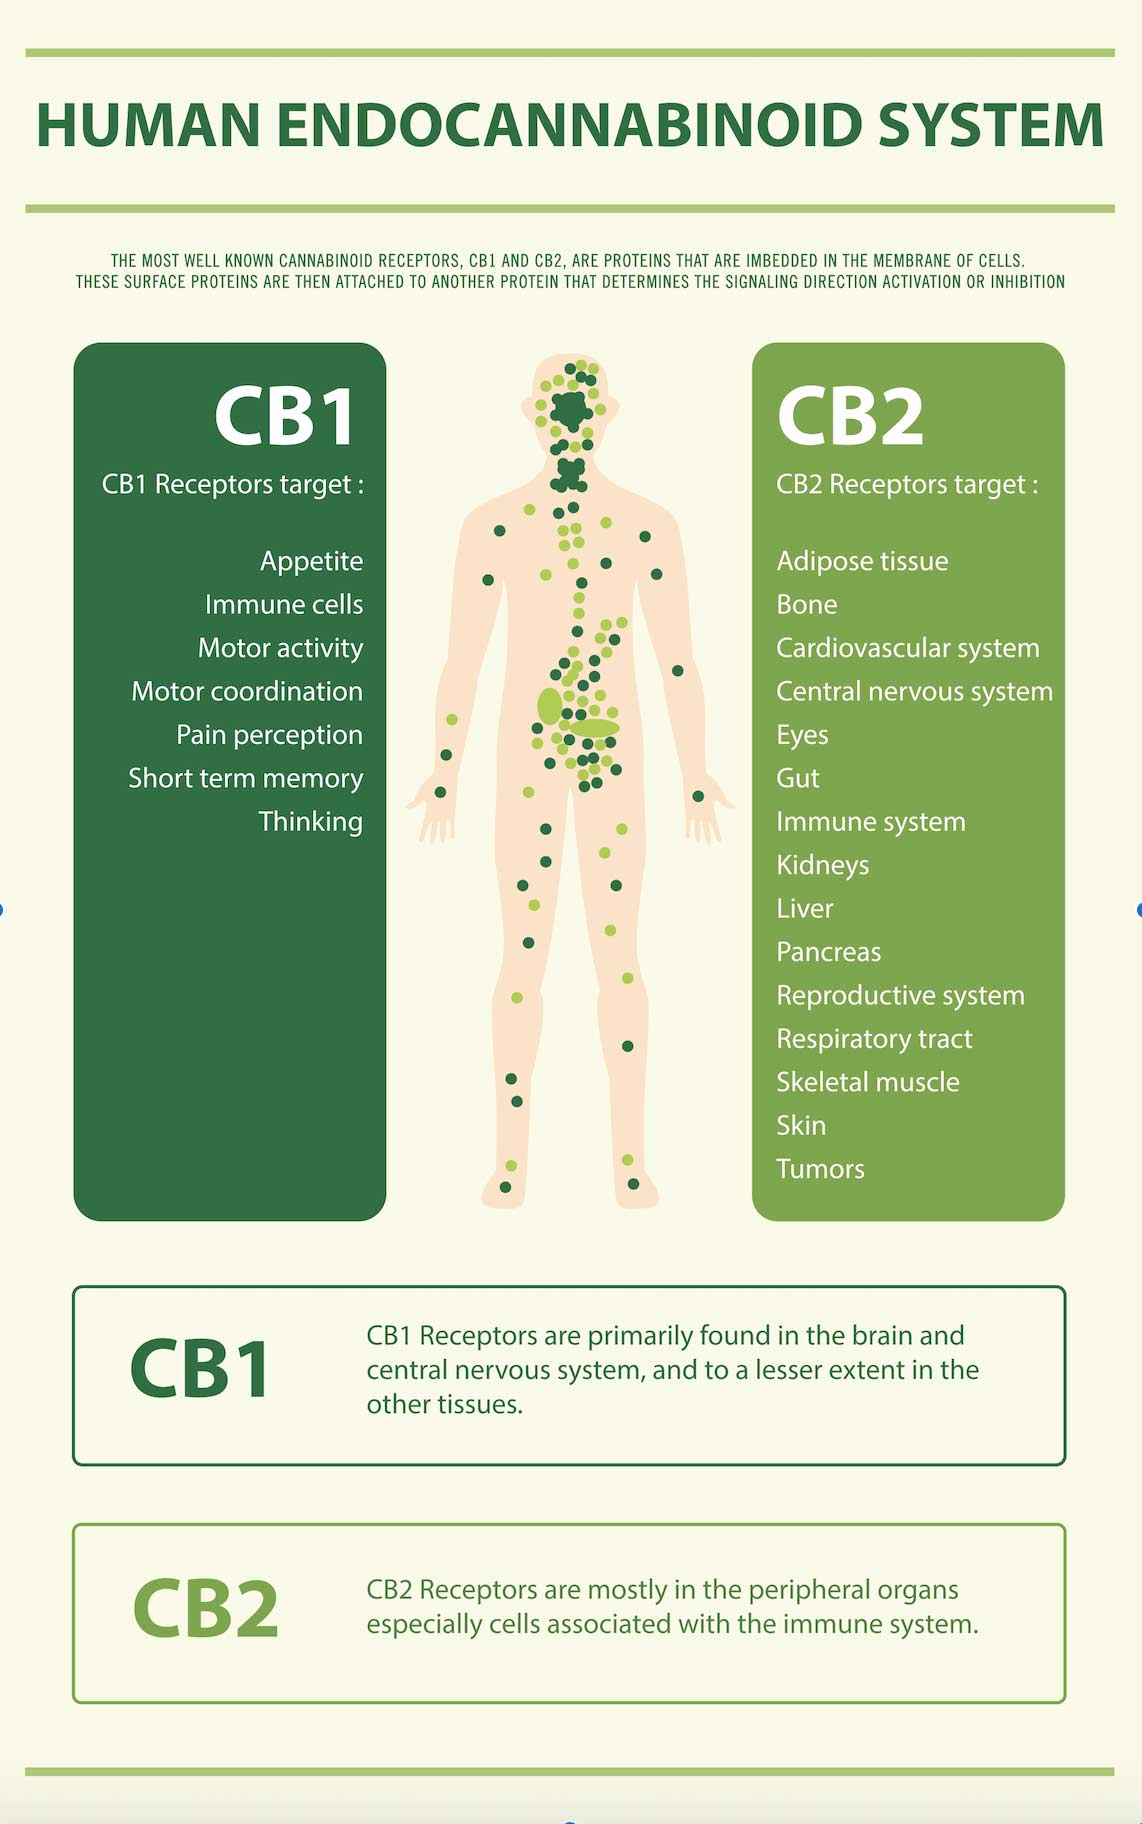 Illustration showing where CB1 and CB2 receptors are located in the human body.